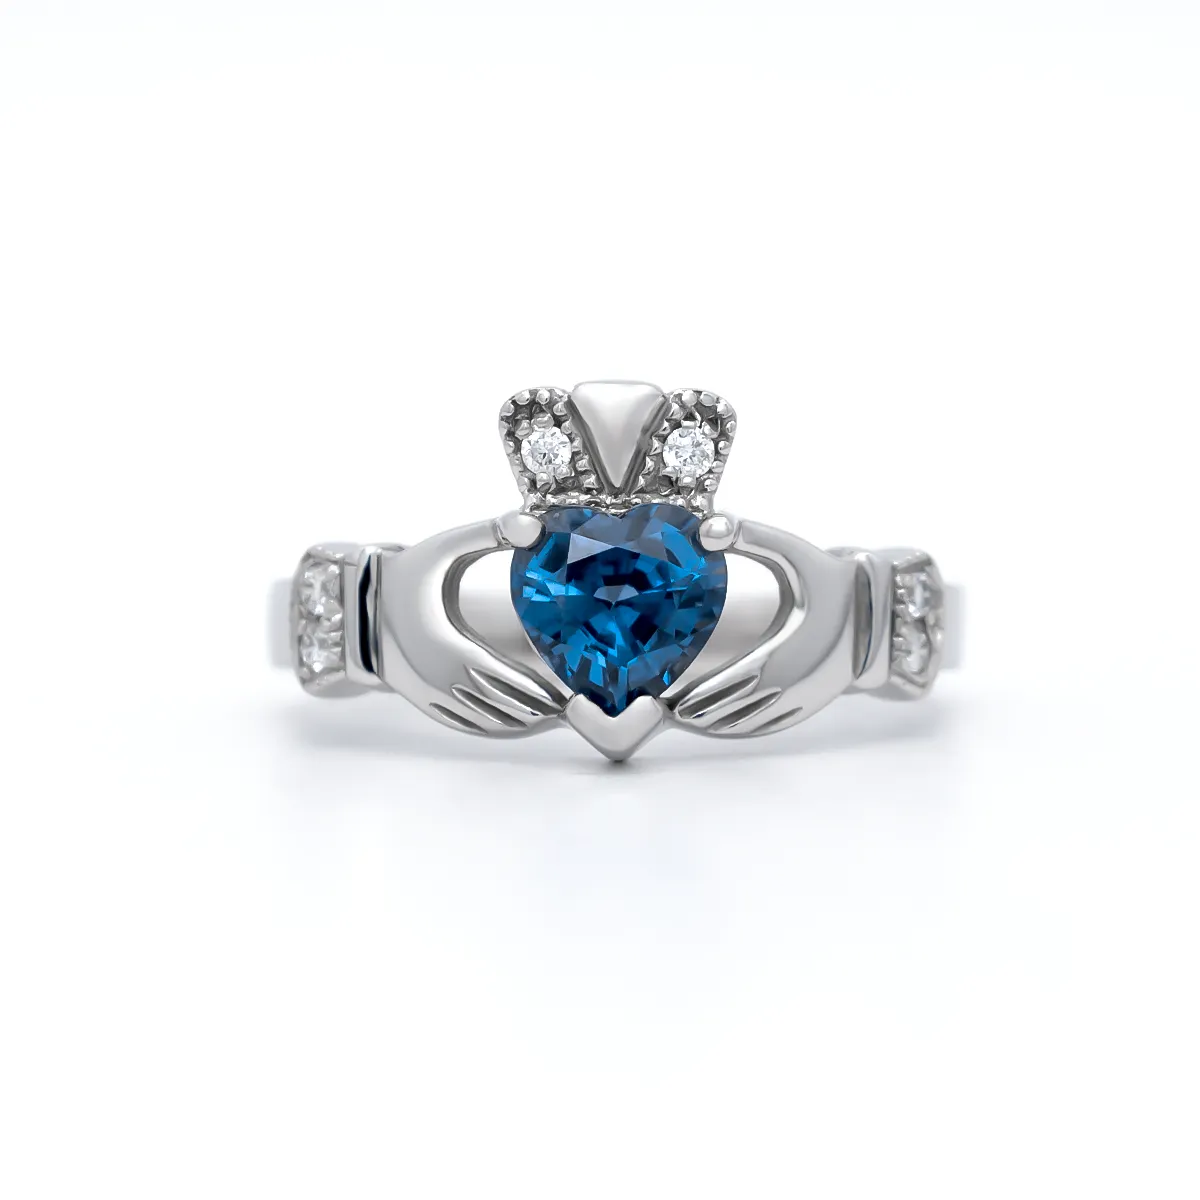 IJCR0035 White Gold Claddagh Ring With Sapphire 1